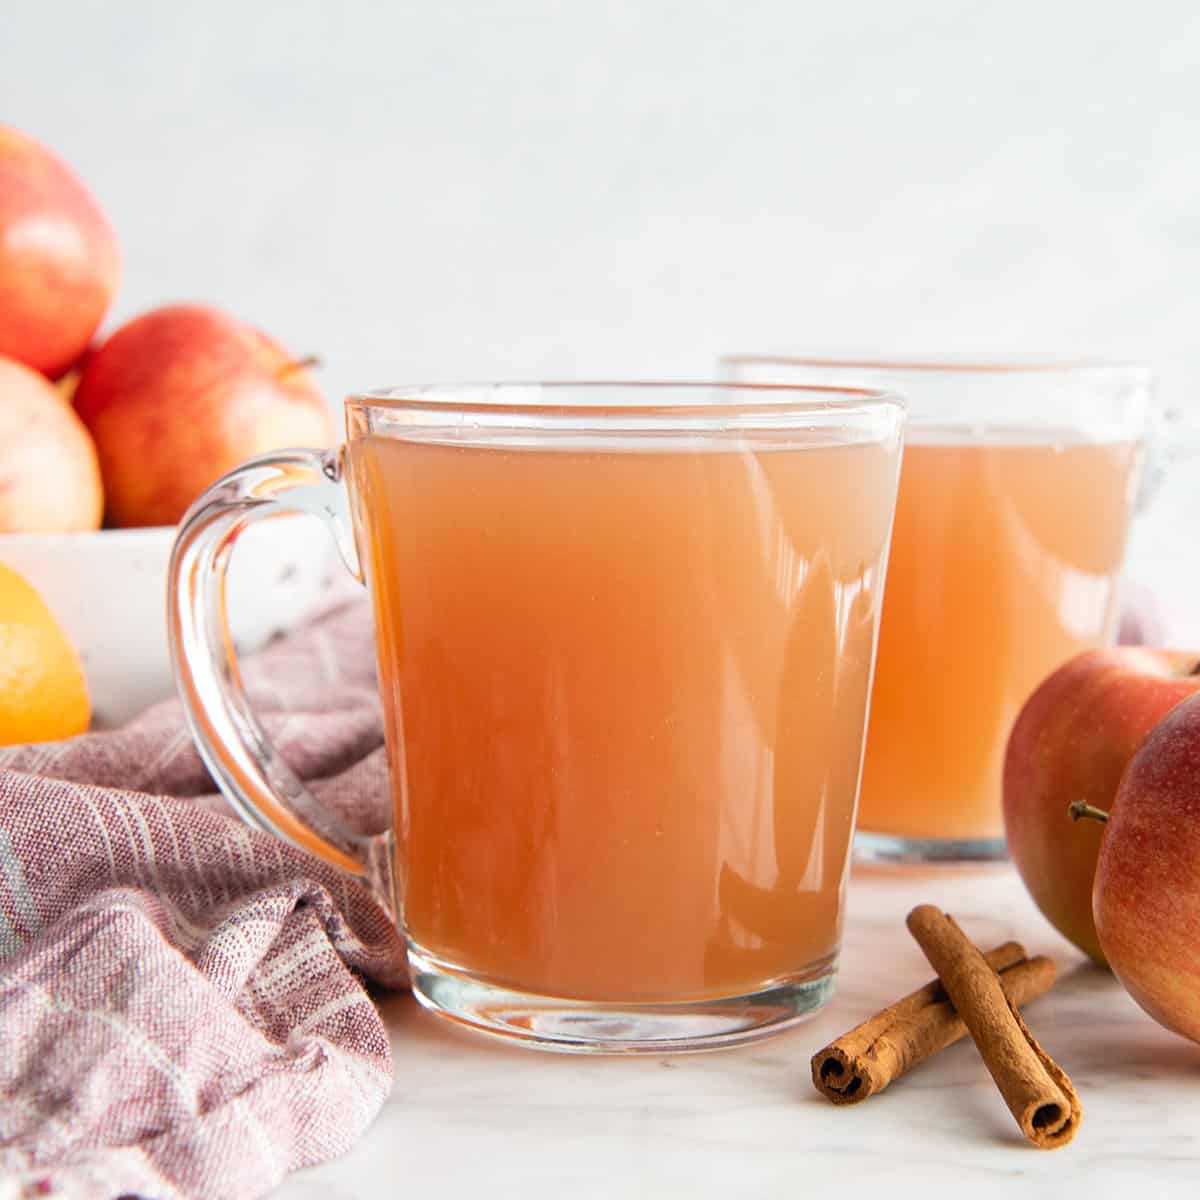 How to Make Perfect Apple Juice with a Juicer